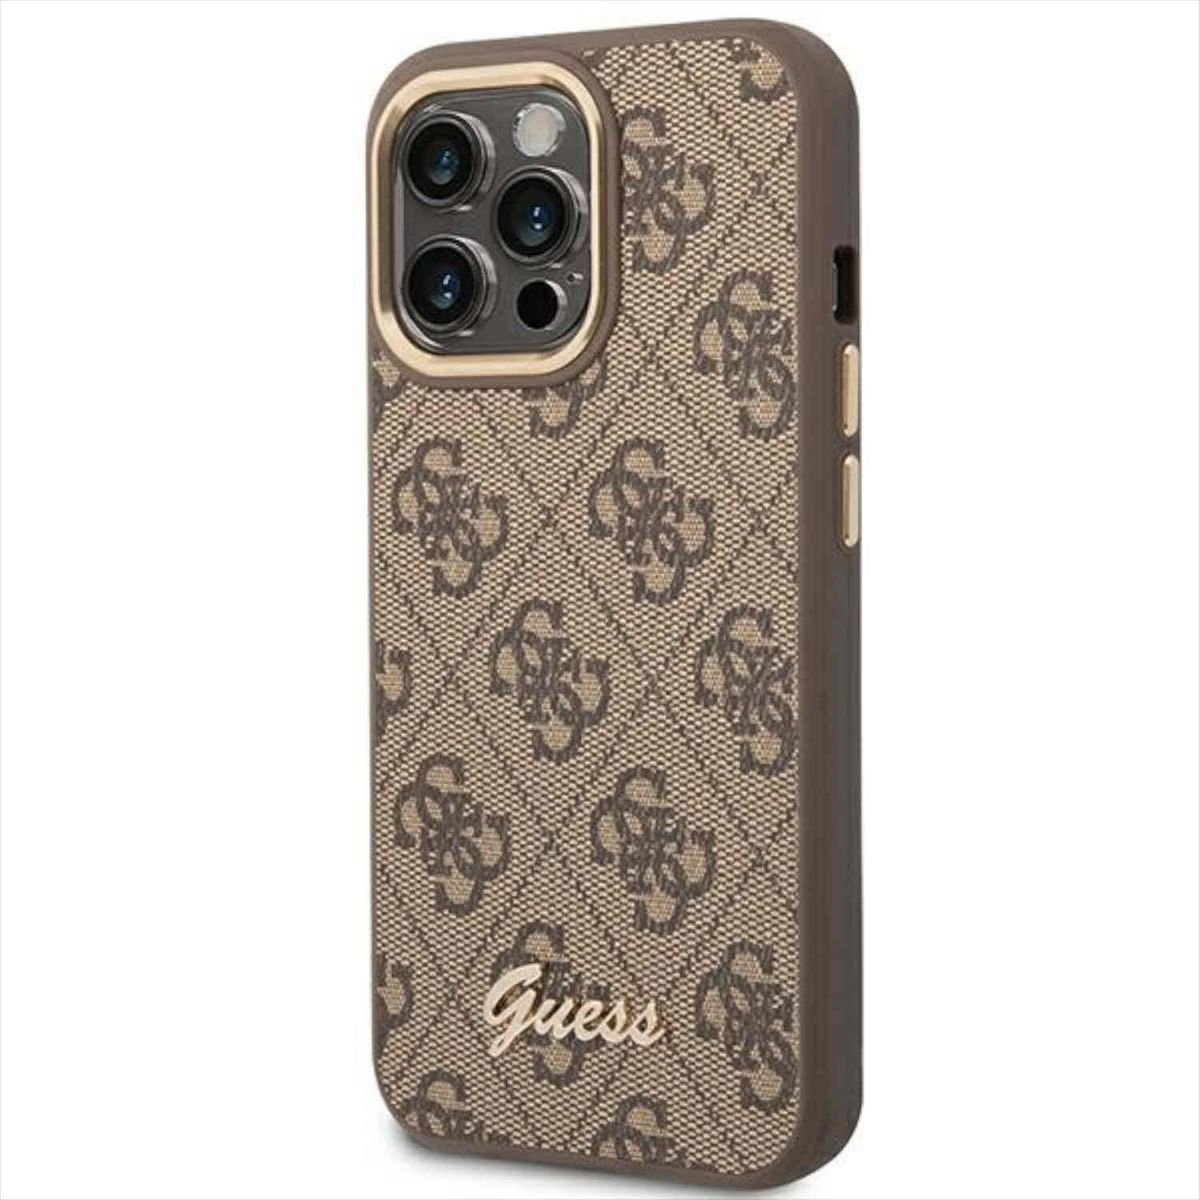 Cover, Full Pro Camera Pro - Tasche Multicolor 14 Case iPhone iPhone Guess 14 für Apple, Max, (Braun), Max Outline Metal GUESS 4G